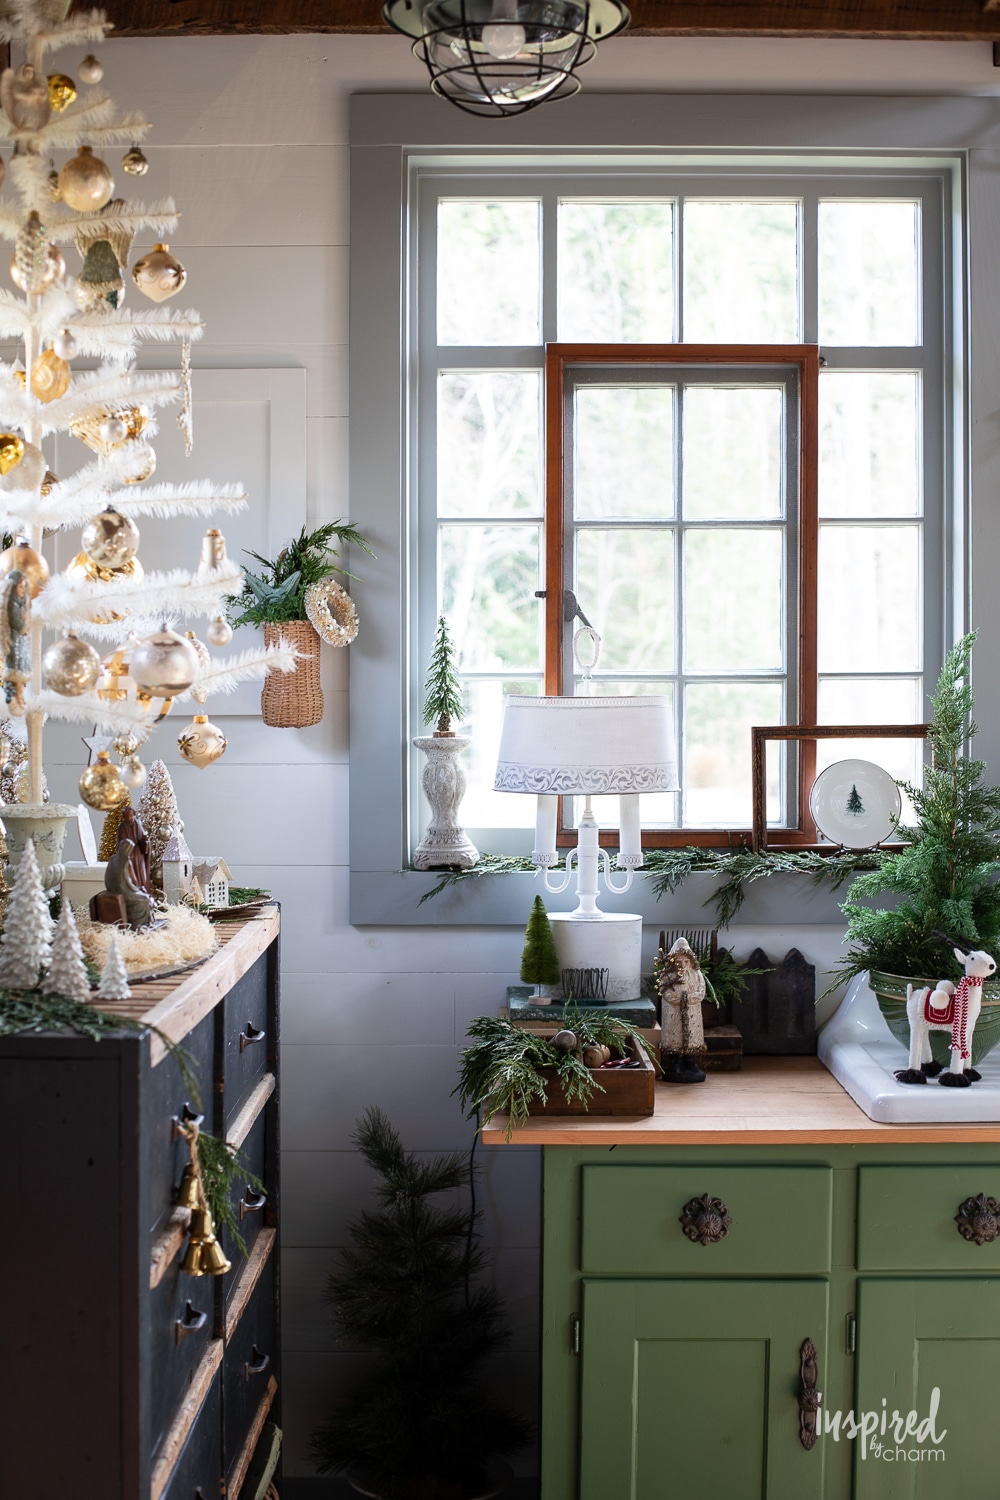 vintage windows and feather tree with green cabinet.